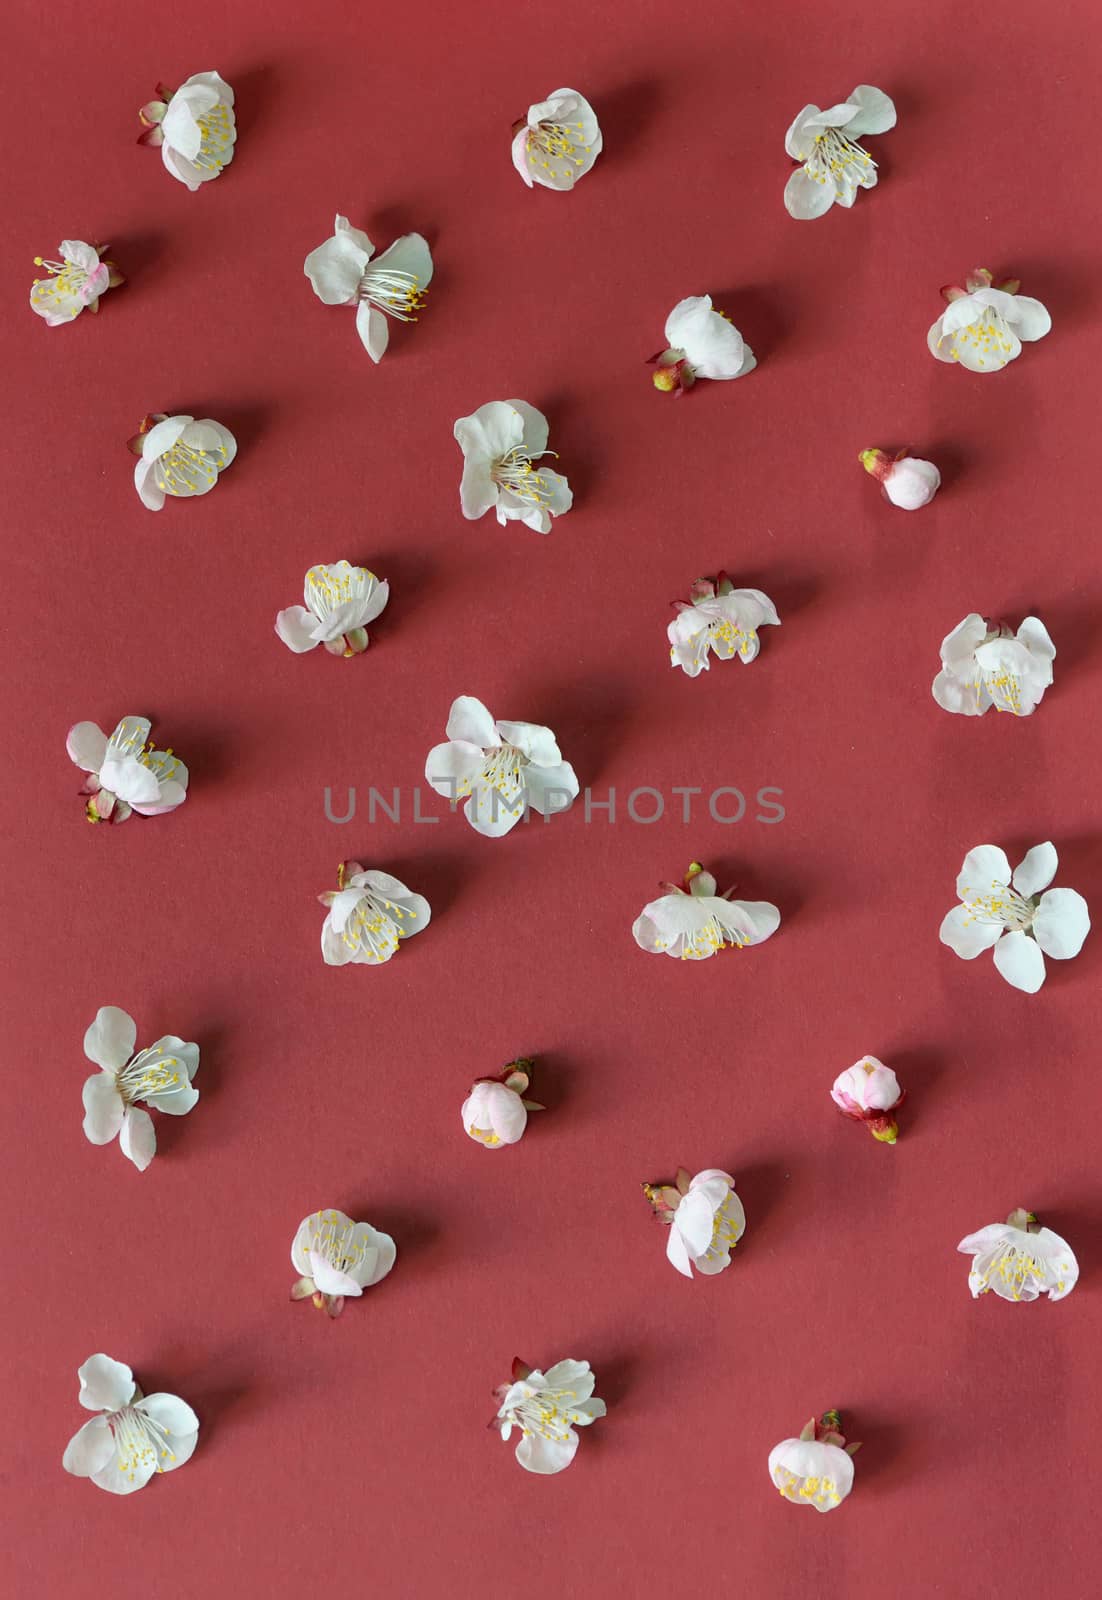 beautiful cherry blossoms on a red paper background